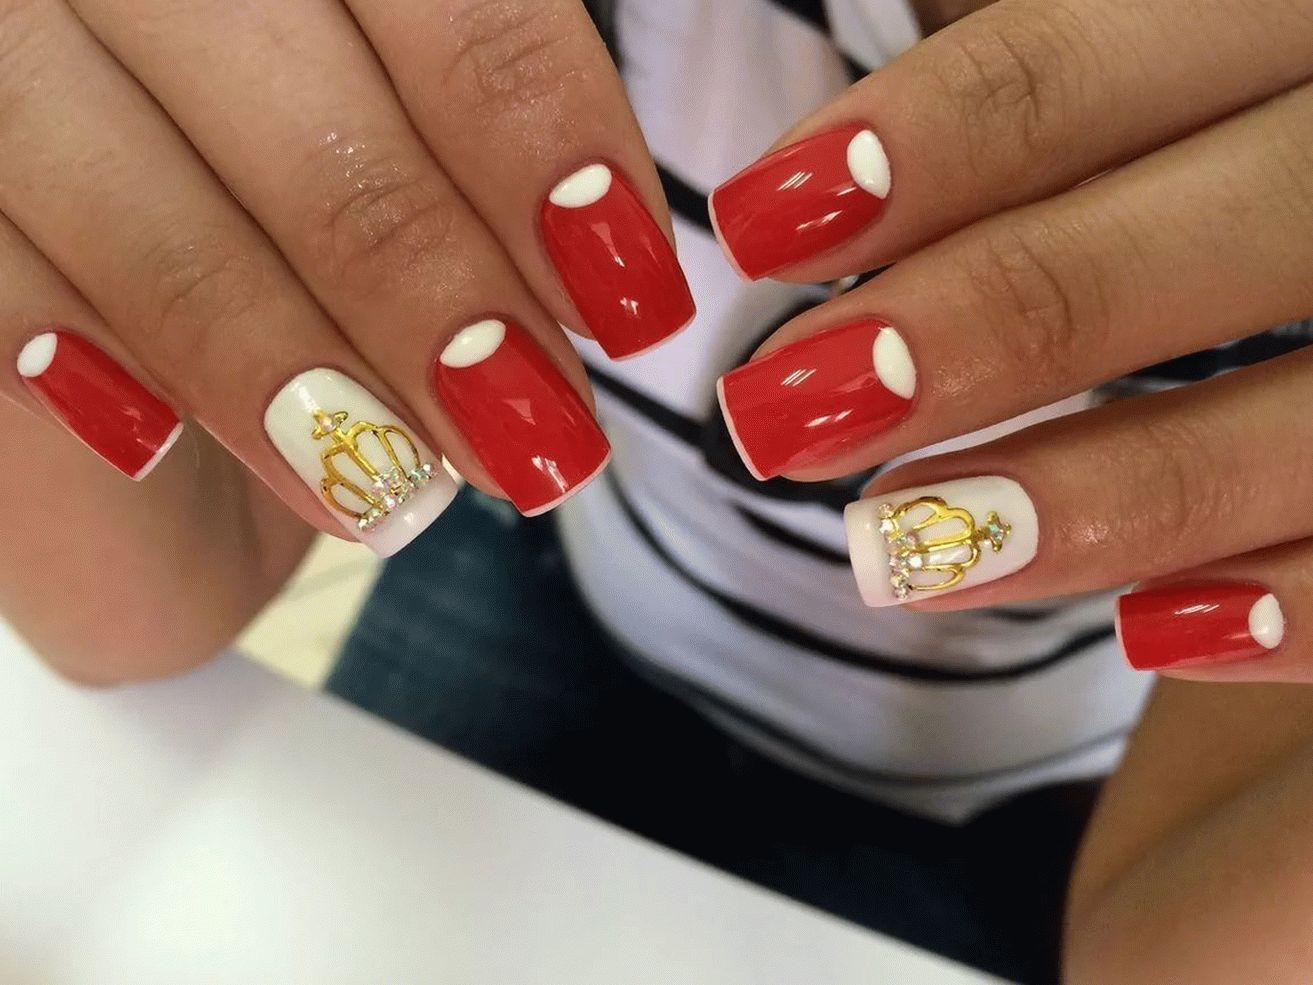 Red-white manicure with a crown